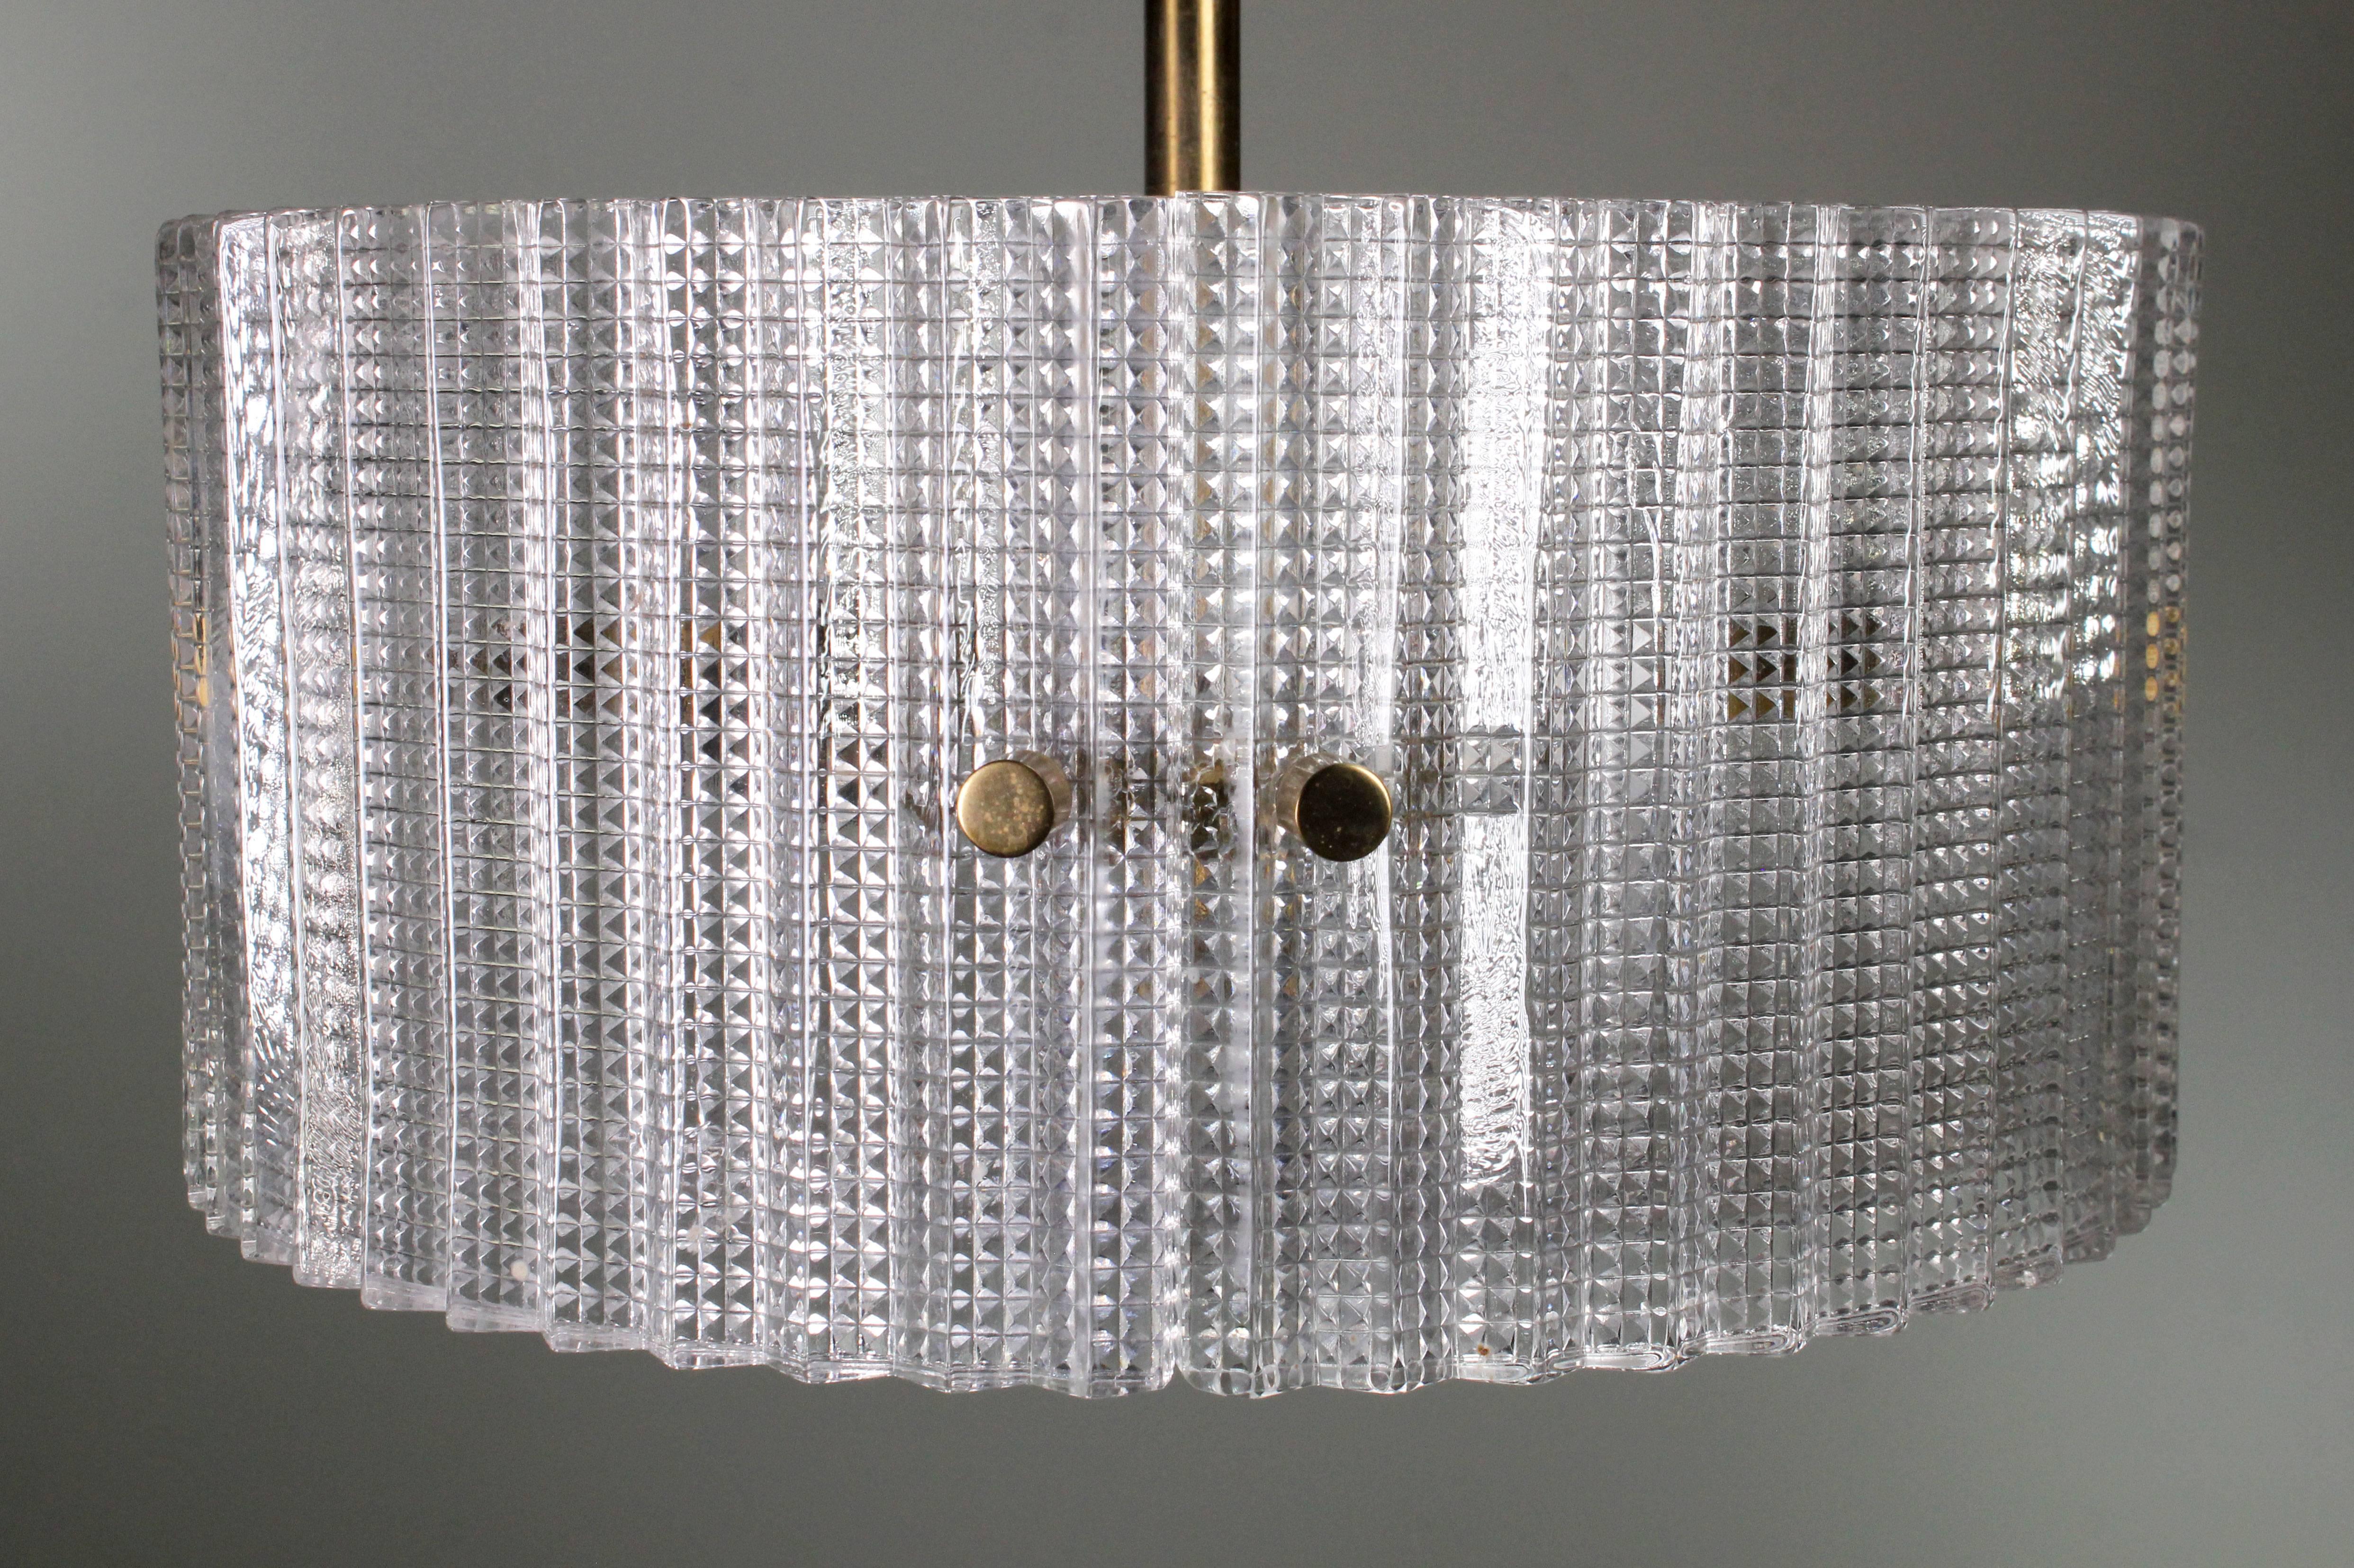 Stunning Swedish Mid-Century Modern textured glass pendant with brass mount and details. Three rounded glass panels held together in a circle with a textured glass base. By acclaimed Swedish designer Carl Fagerlund and manufactured at Orrefors